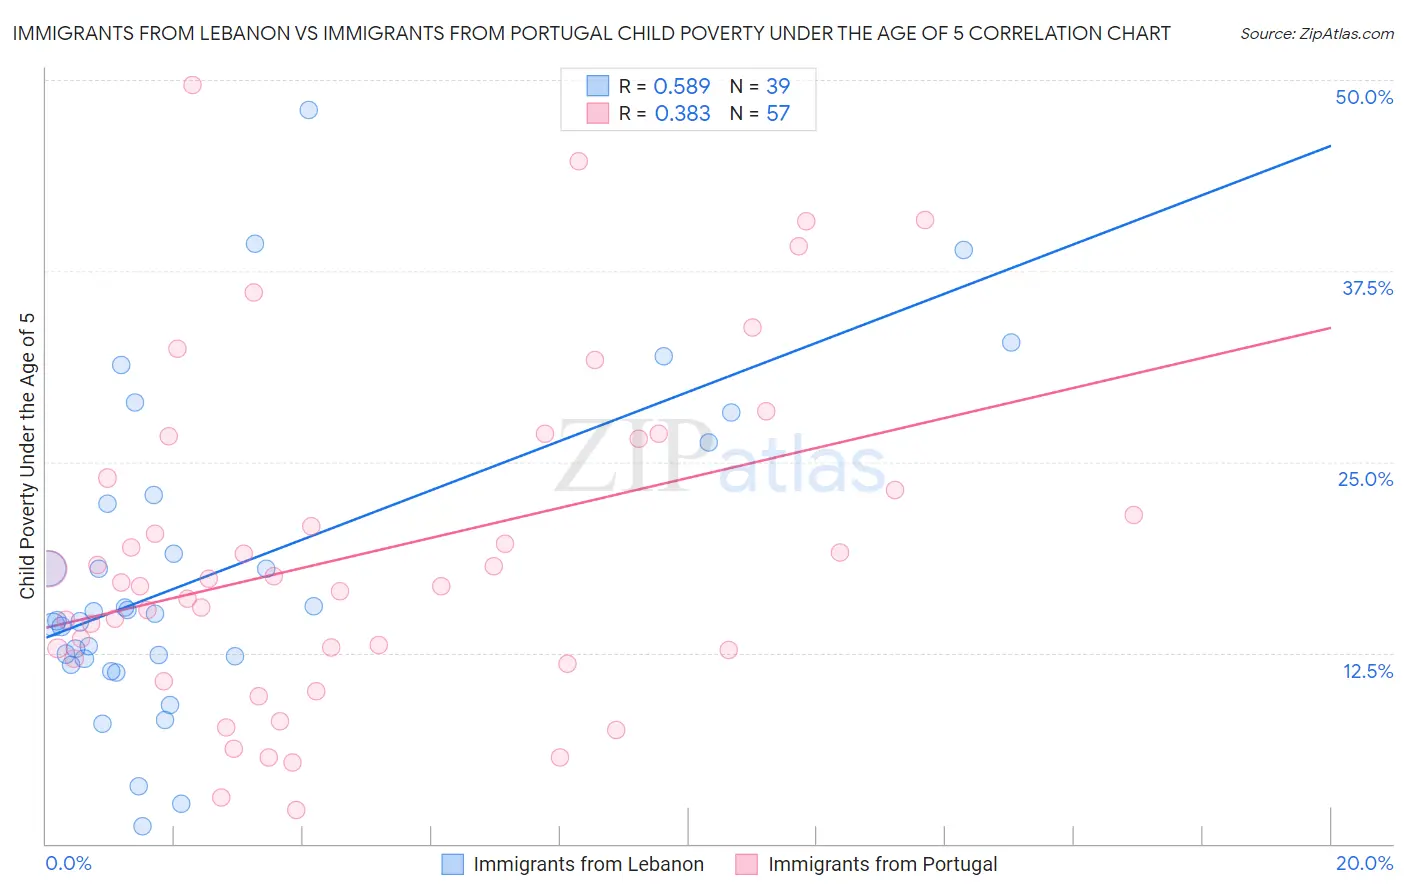 Immigrants from Lebanon vs Immigrants from Portugal Child Poverty Under the Age of 5